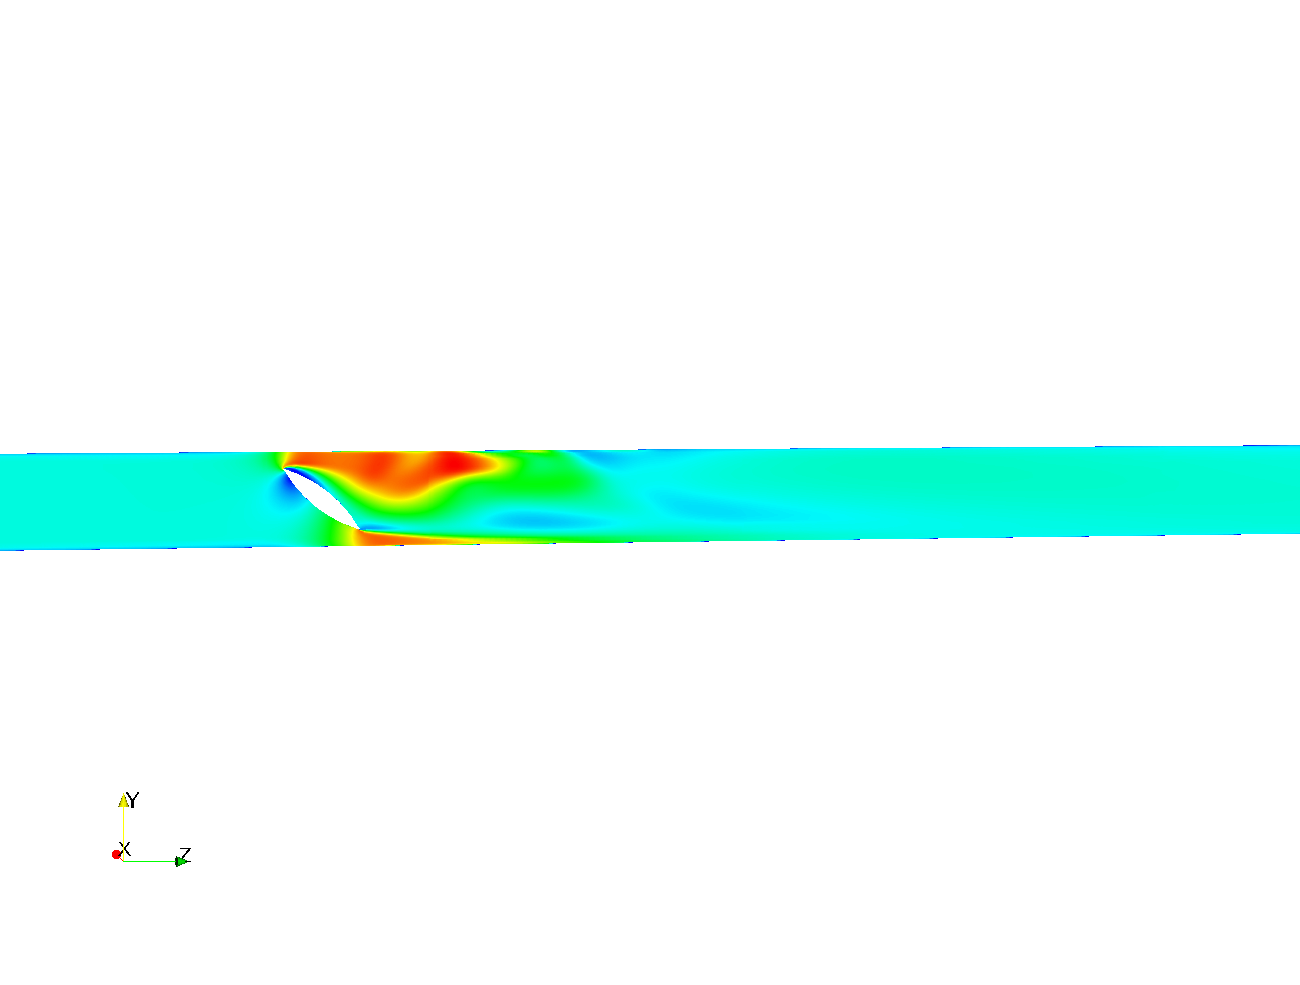 Butterfly Valve Flow CFD Simulation image